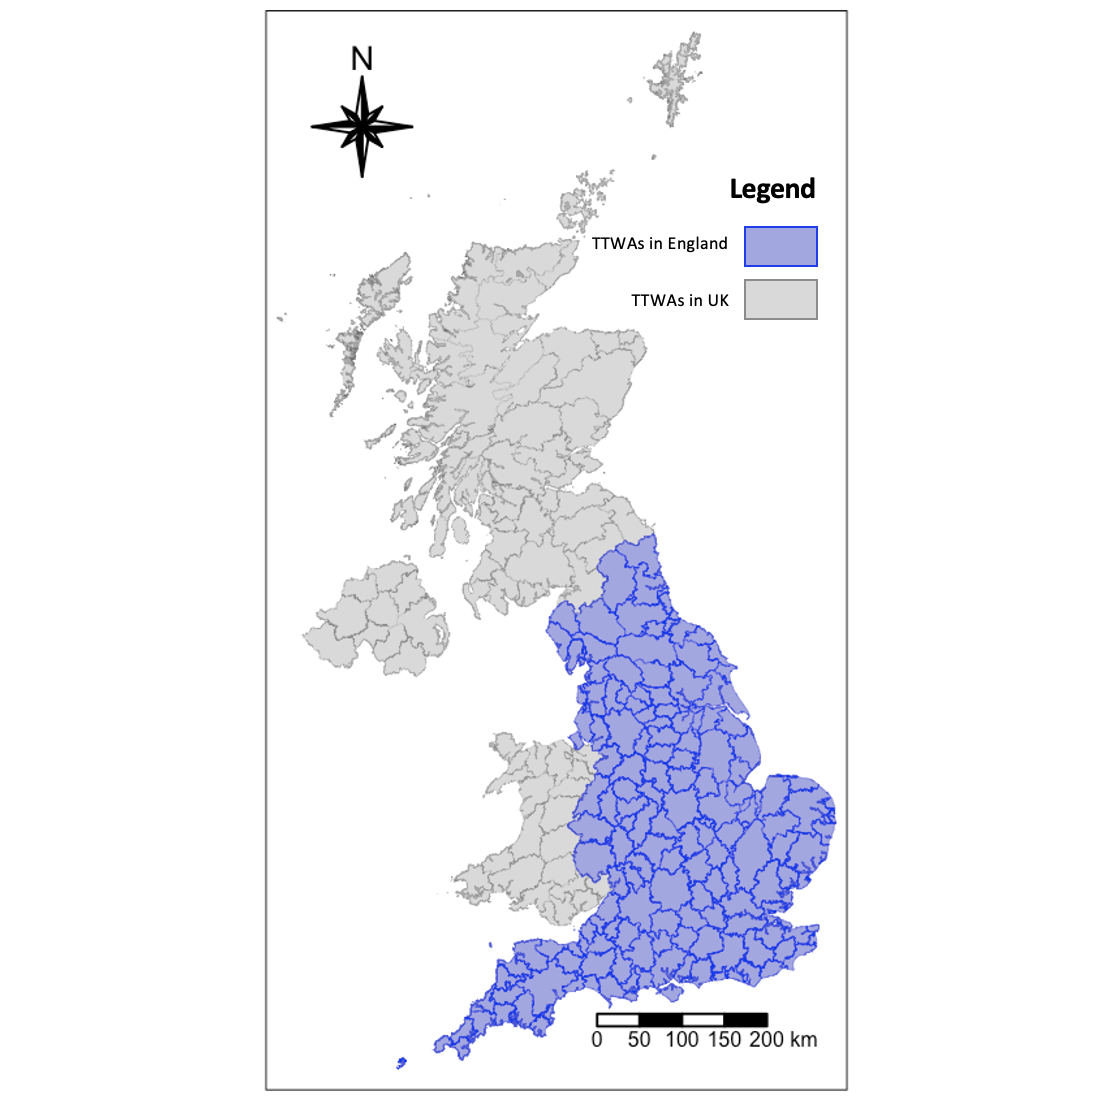 The Map of Travel to Work Areas (TTWAs) within UK